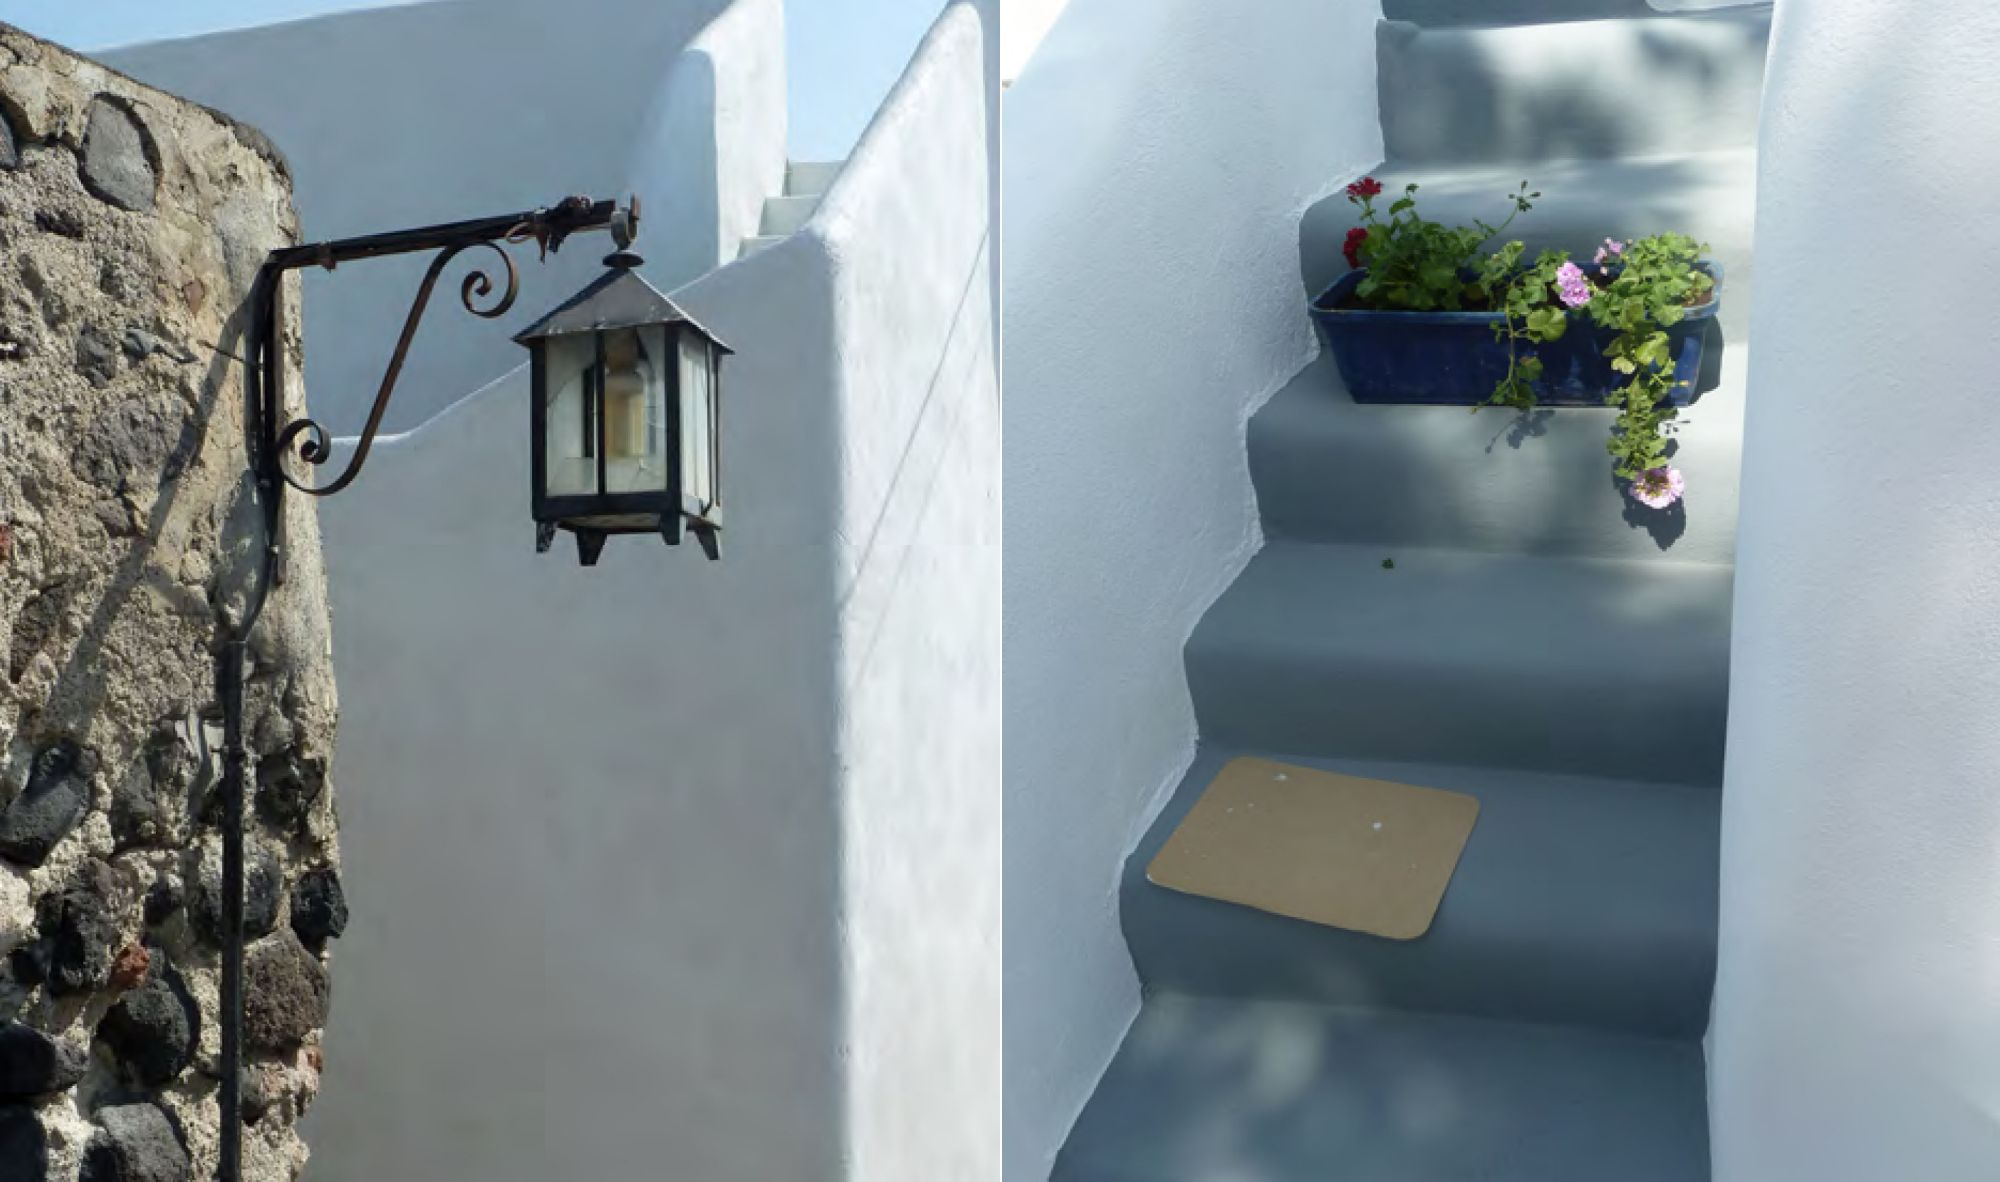 Page 26: An old street lamp / Page 27: Flowers on the stairs